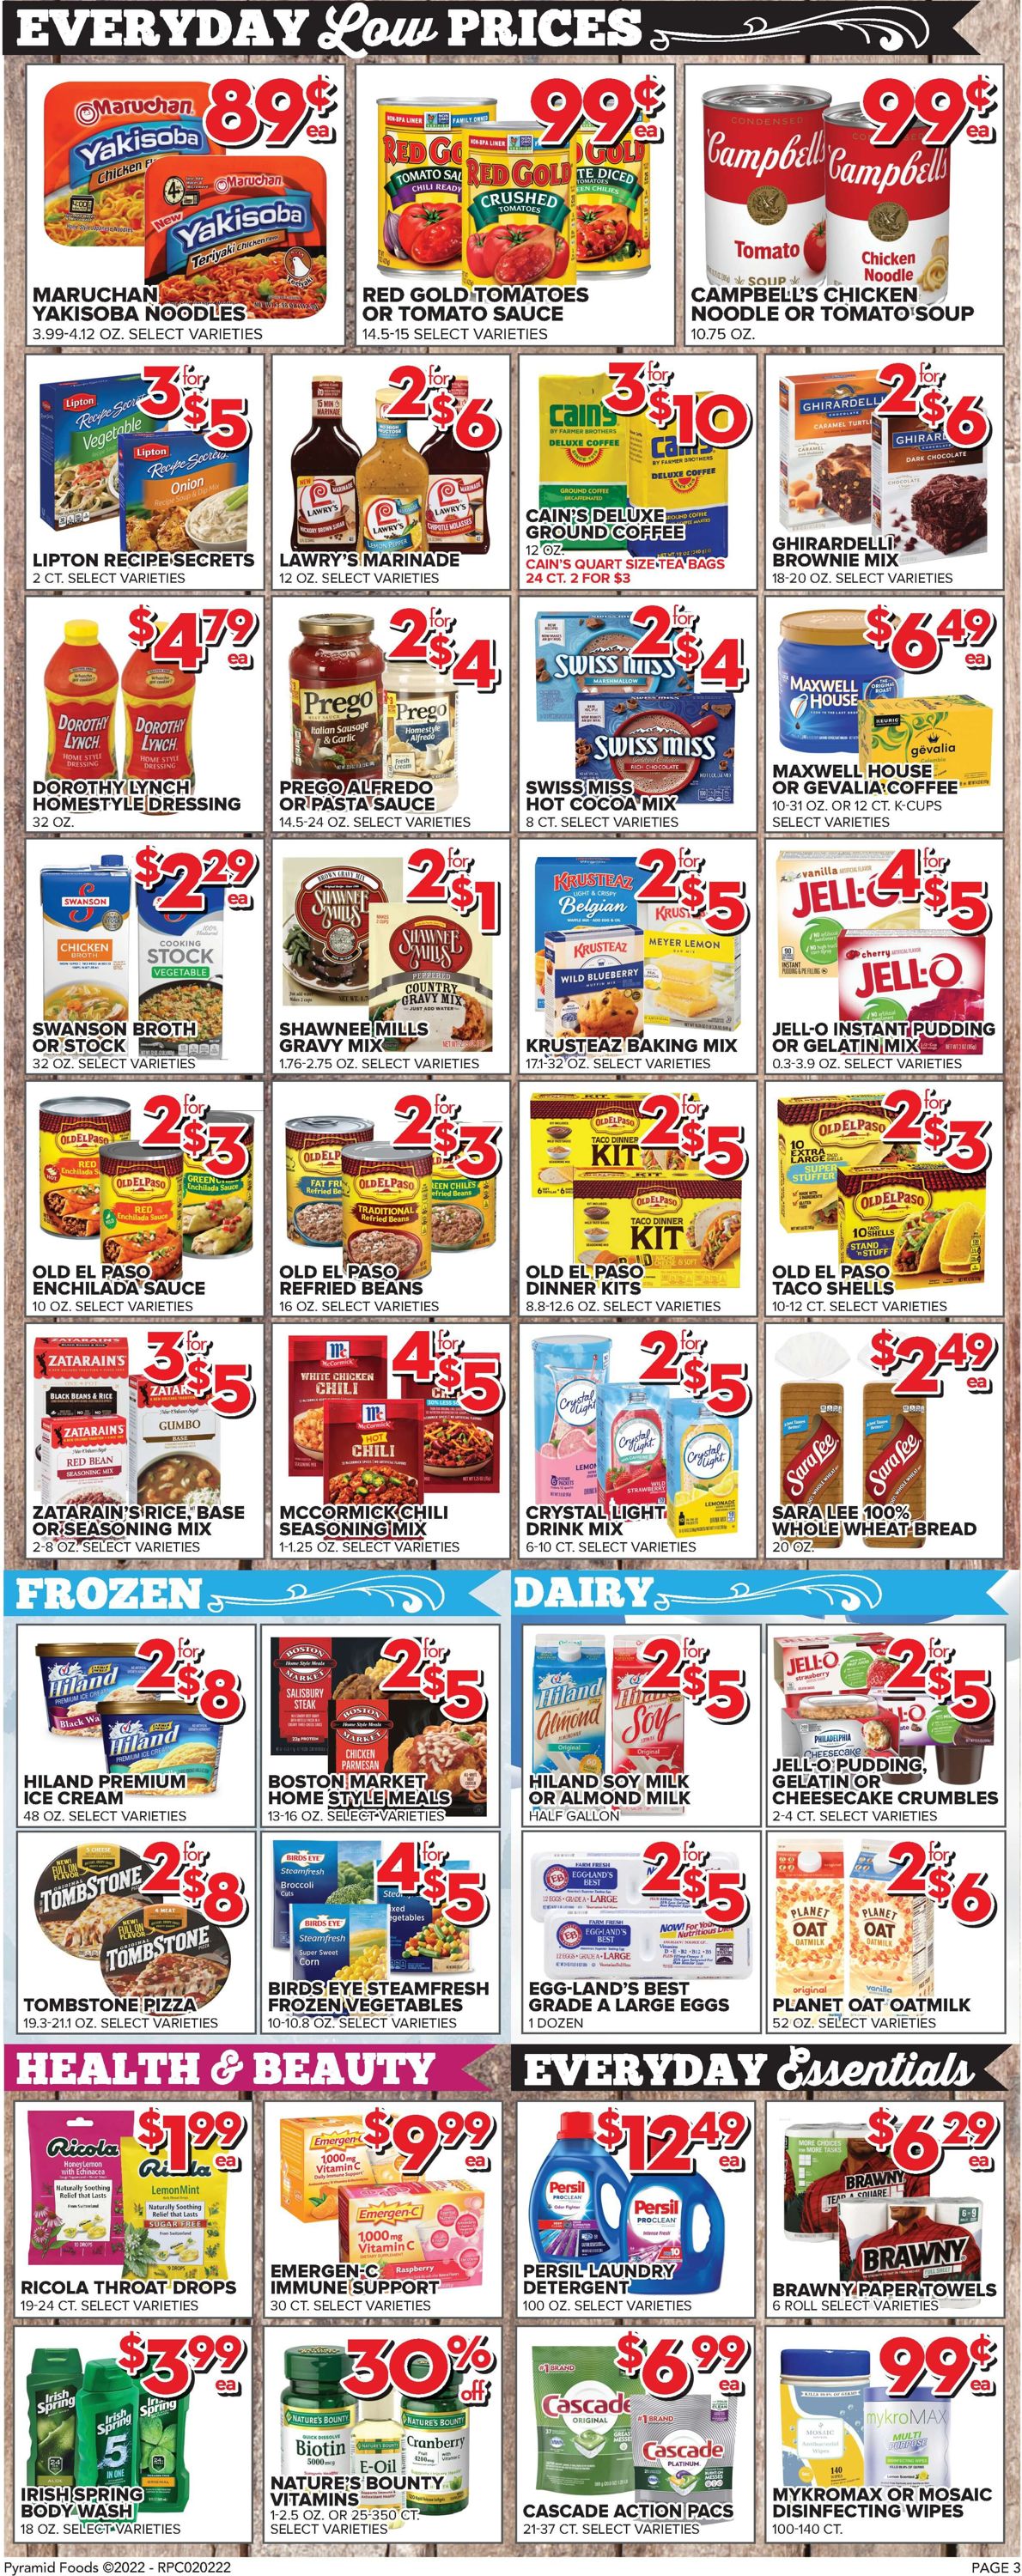 Price Cutter Weekly Ad Circular - valid 02/02-02/08/2022 (Page 3)